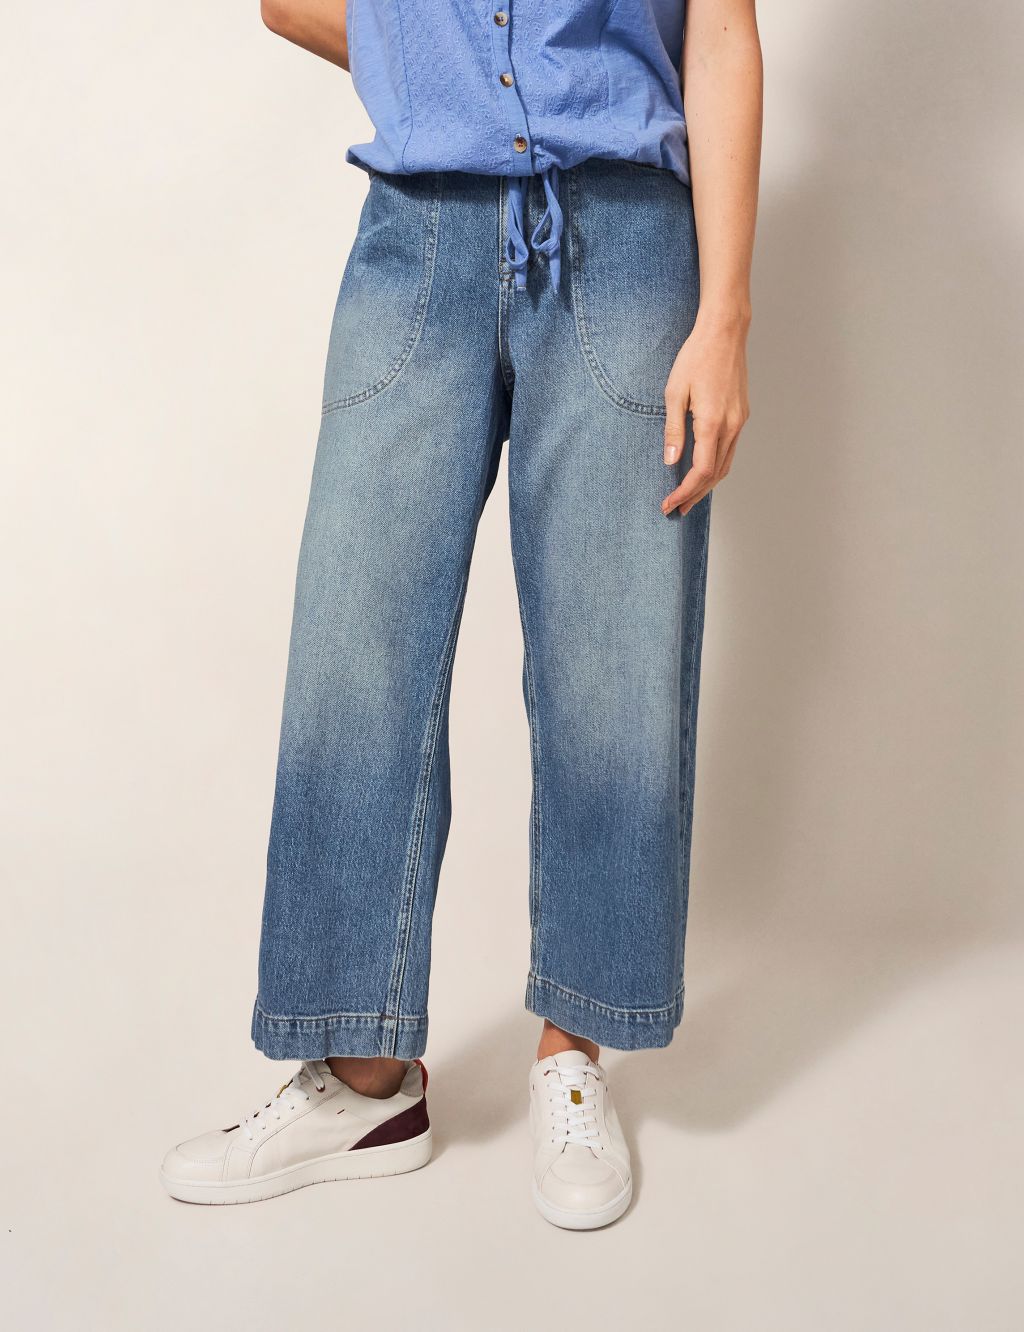 Wide Leg Cropped Jeans image 1